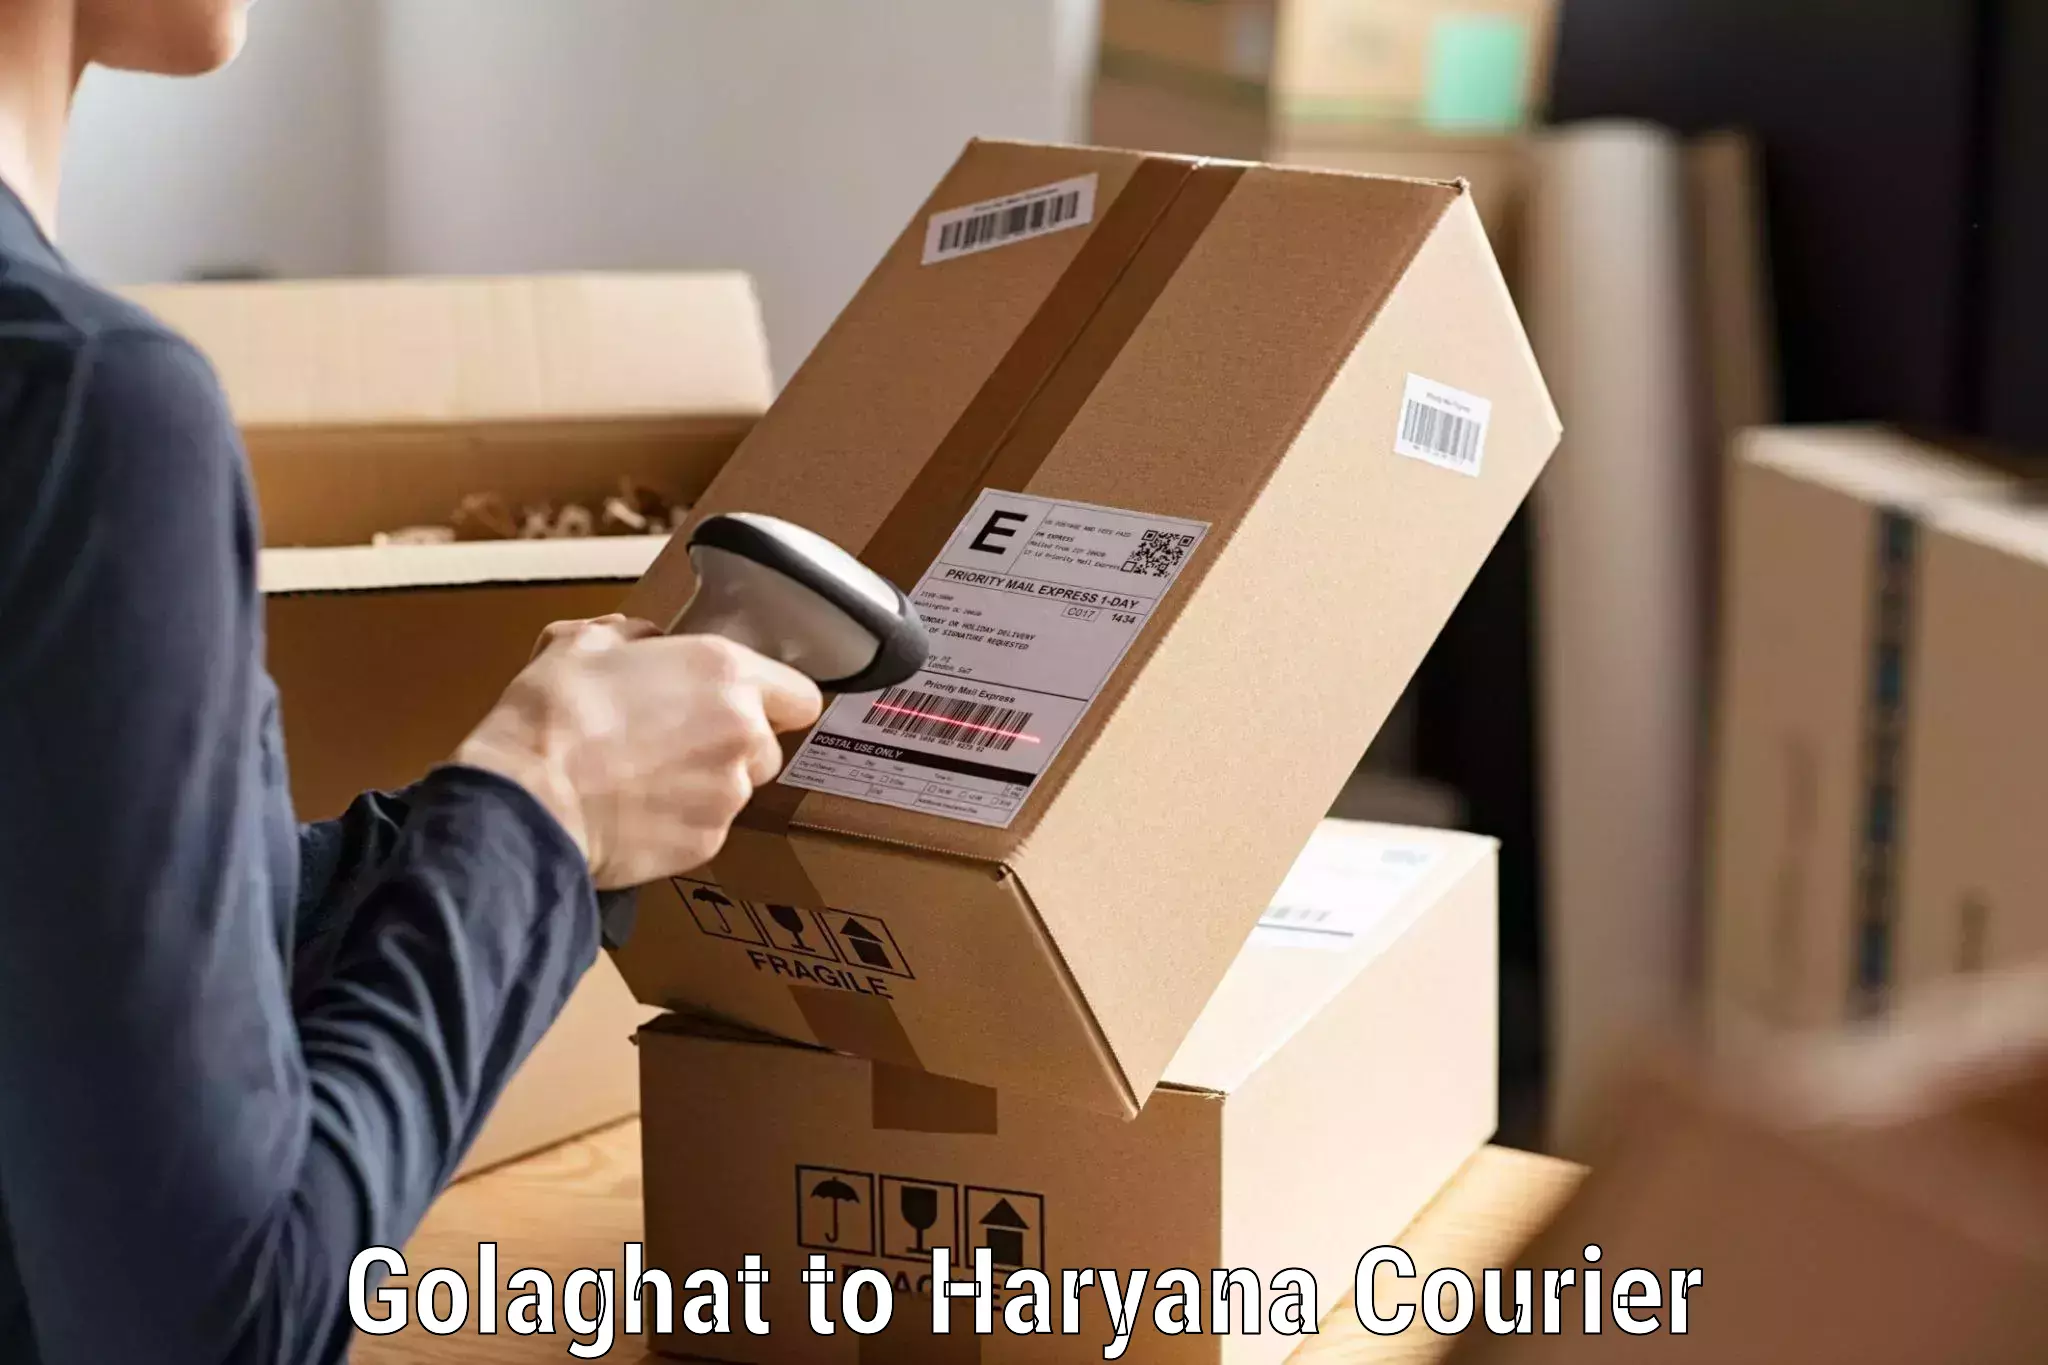 Urgent courier needs Golaghat to Gurgaon